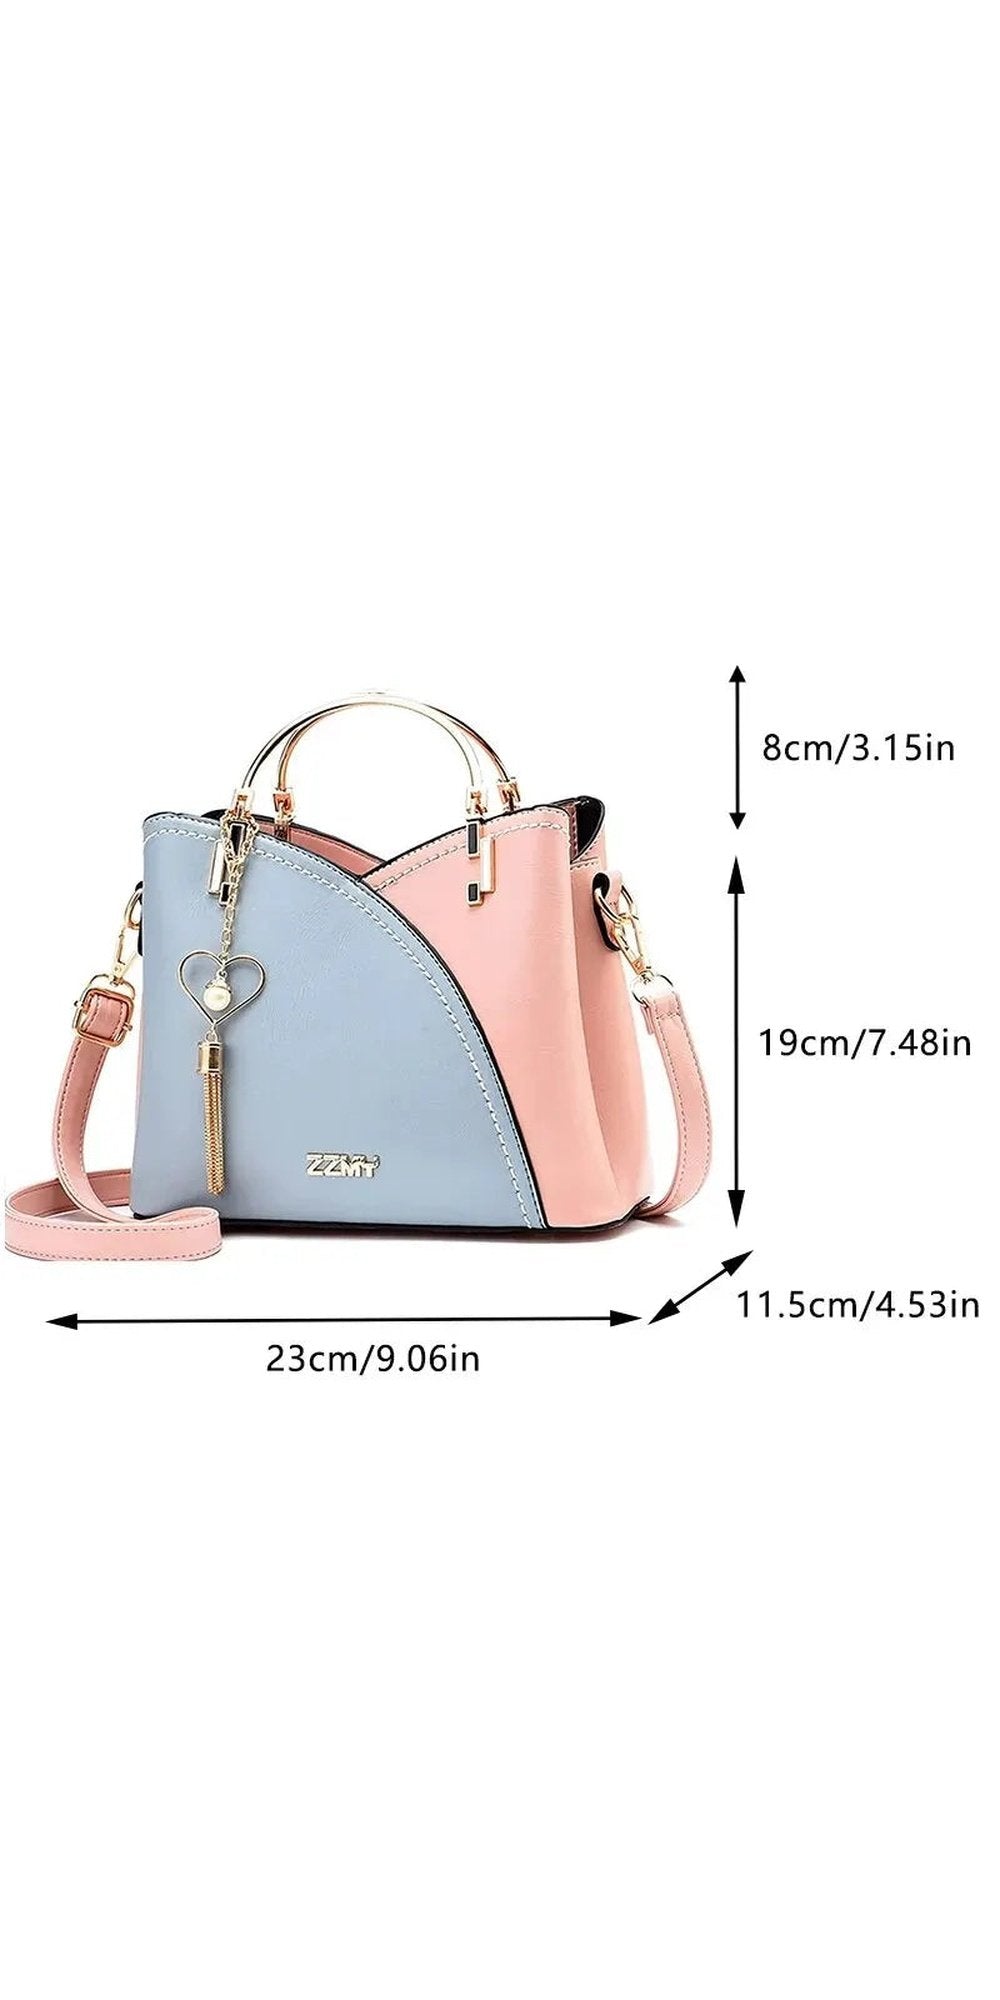 Women Patchwork Handbags PU Leather Purse Block Handle Tote Bags Fashion Large Capacity Stitching Totes Satchel Shoulder Bag New